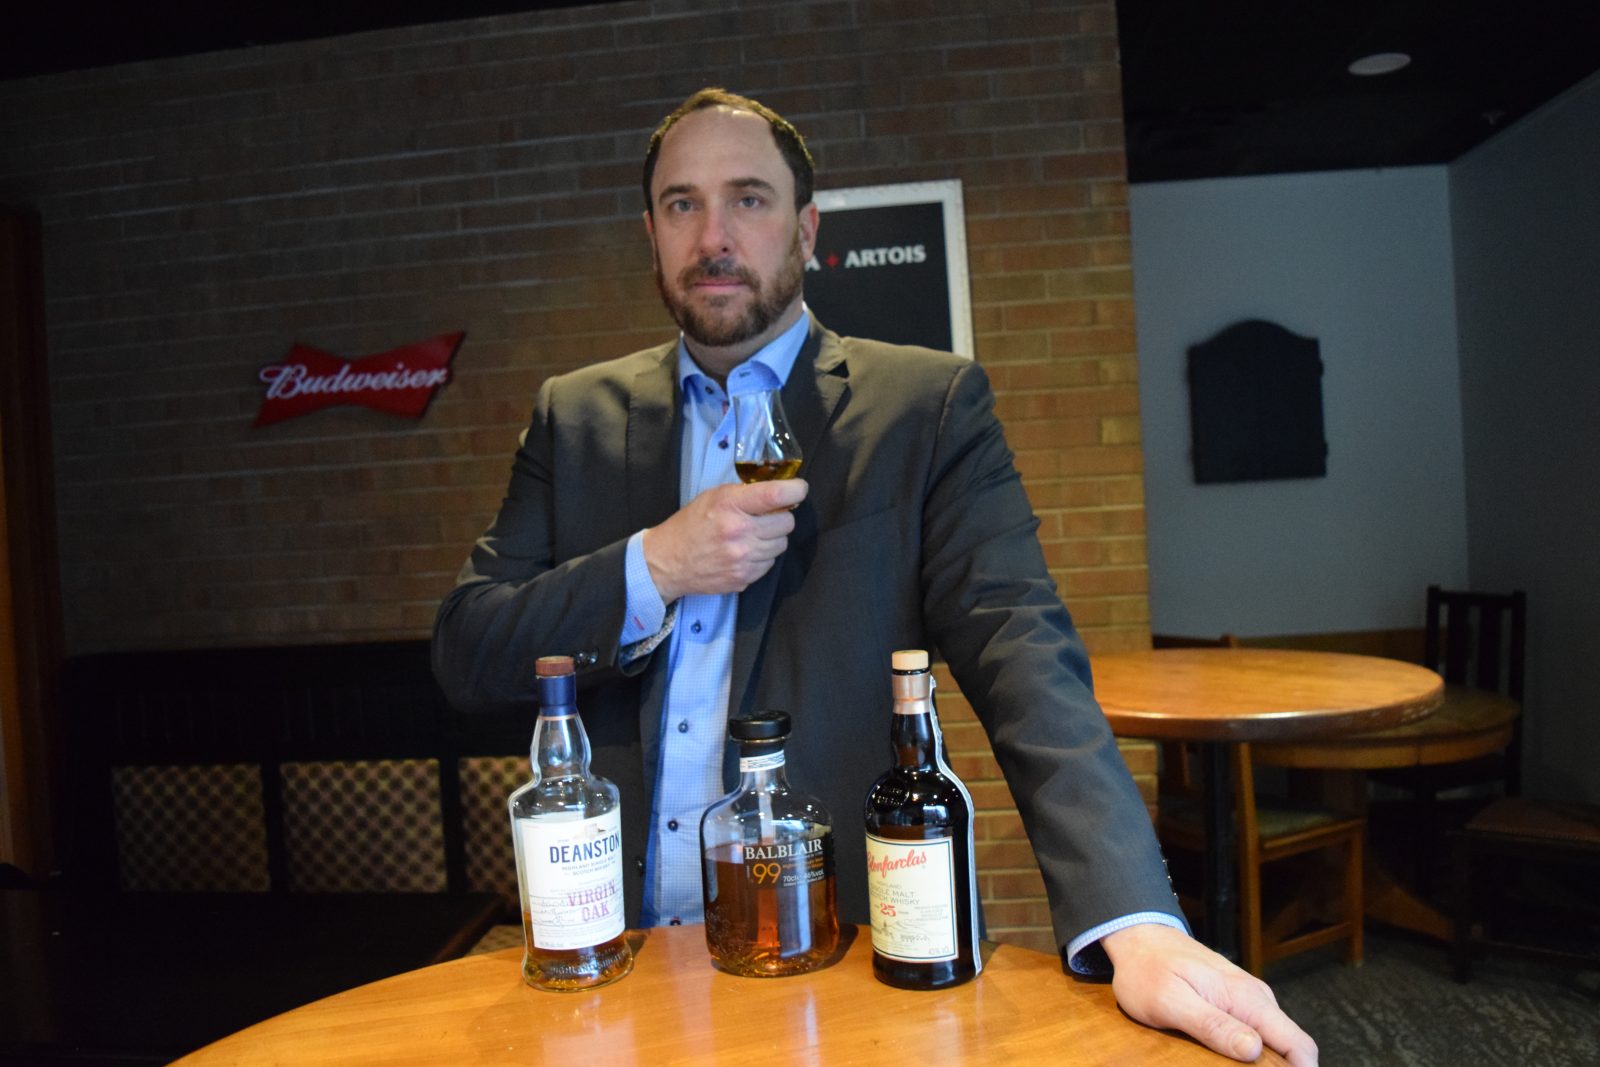 Getting better with age: Wonderful World of Whiskey gets ready for fourth year